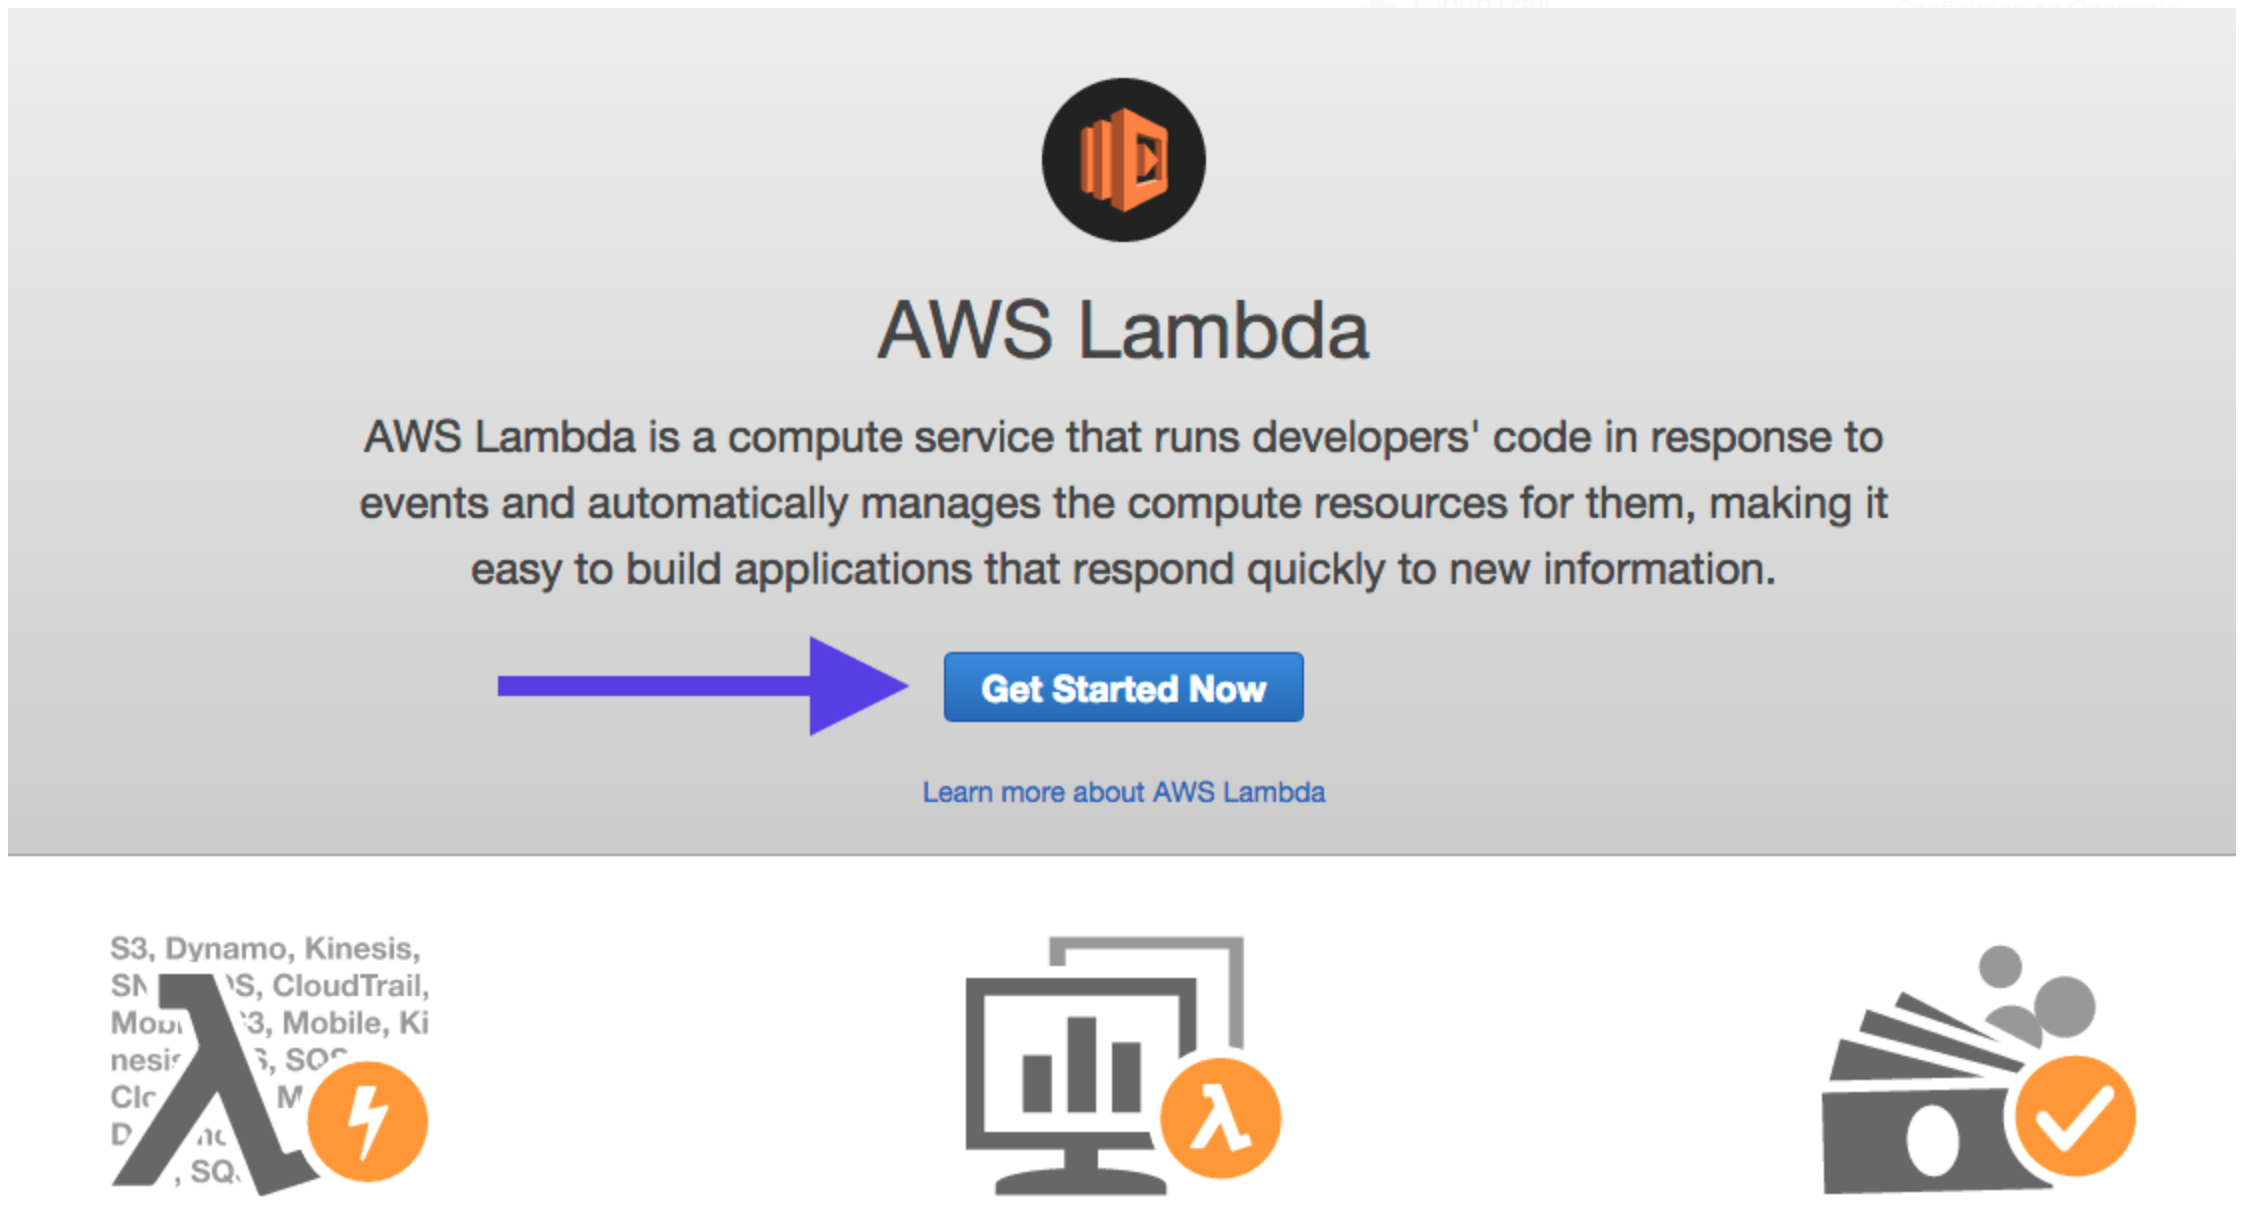 An image showing the get started button for AWS Lambda.